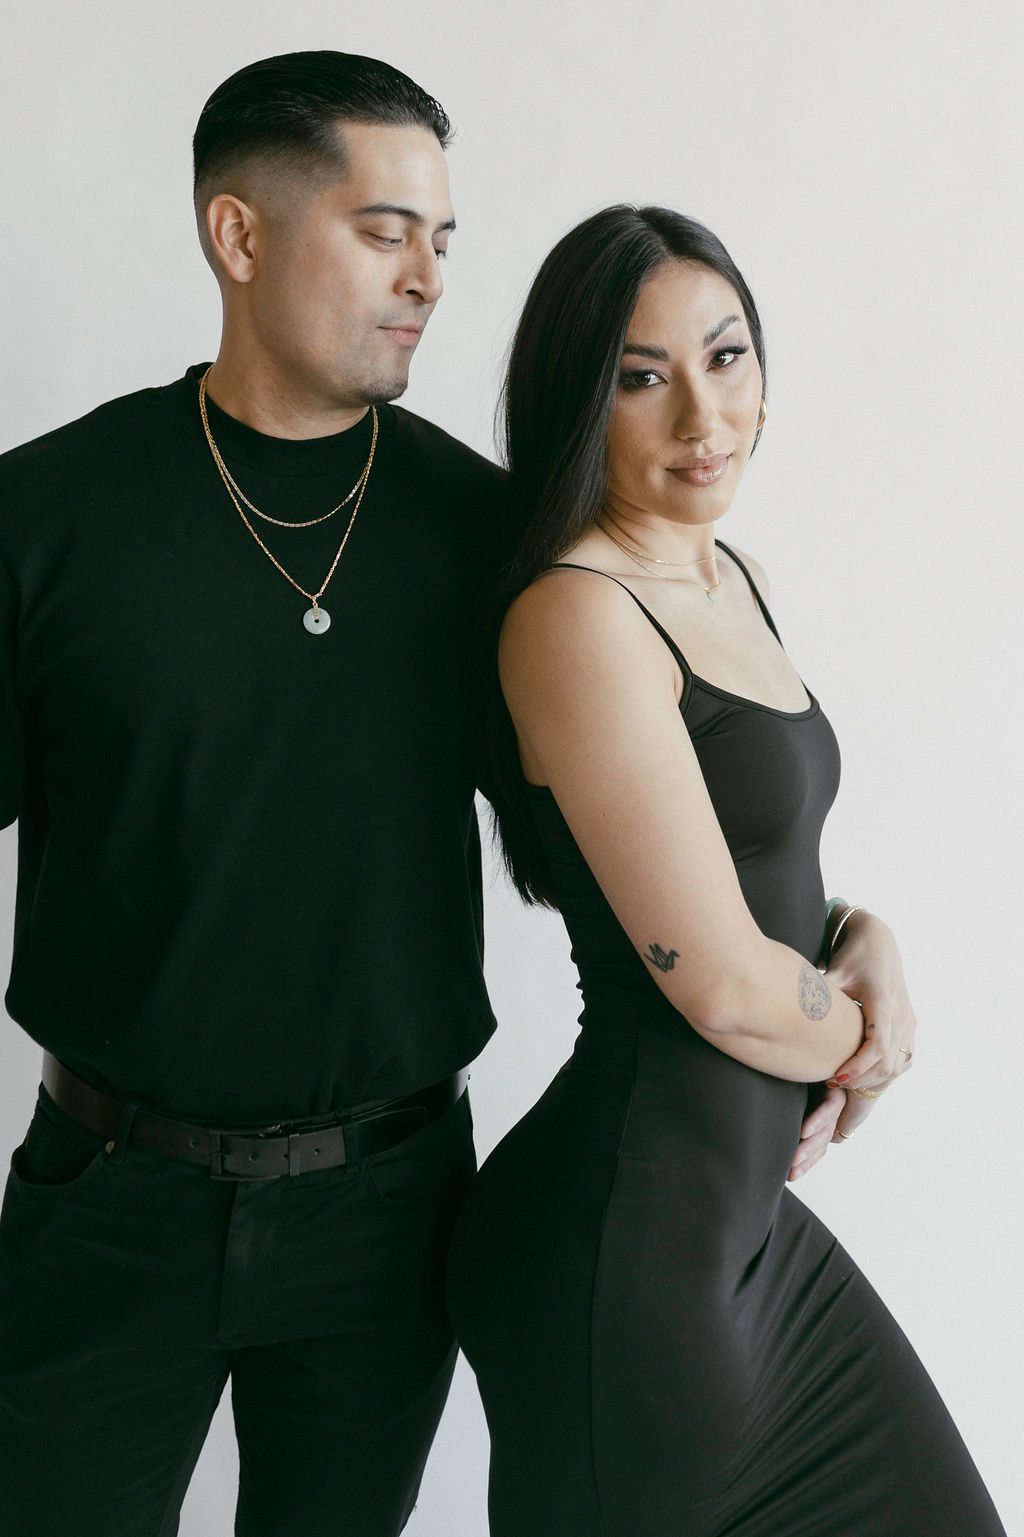 Edgy Studio Engagement Photos in Oakland, CA